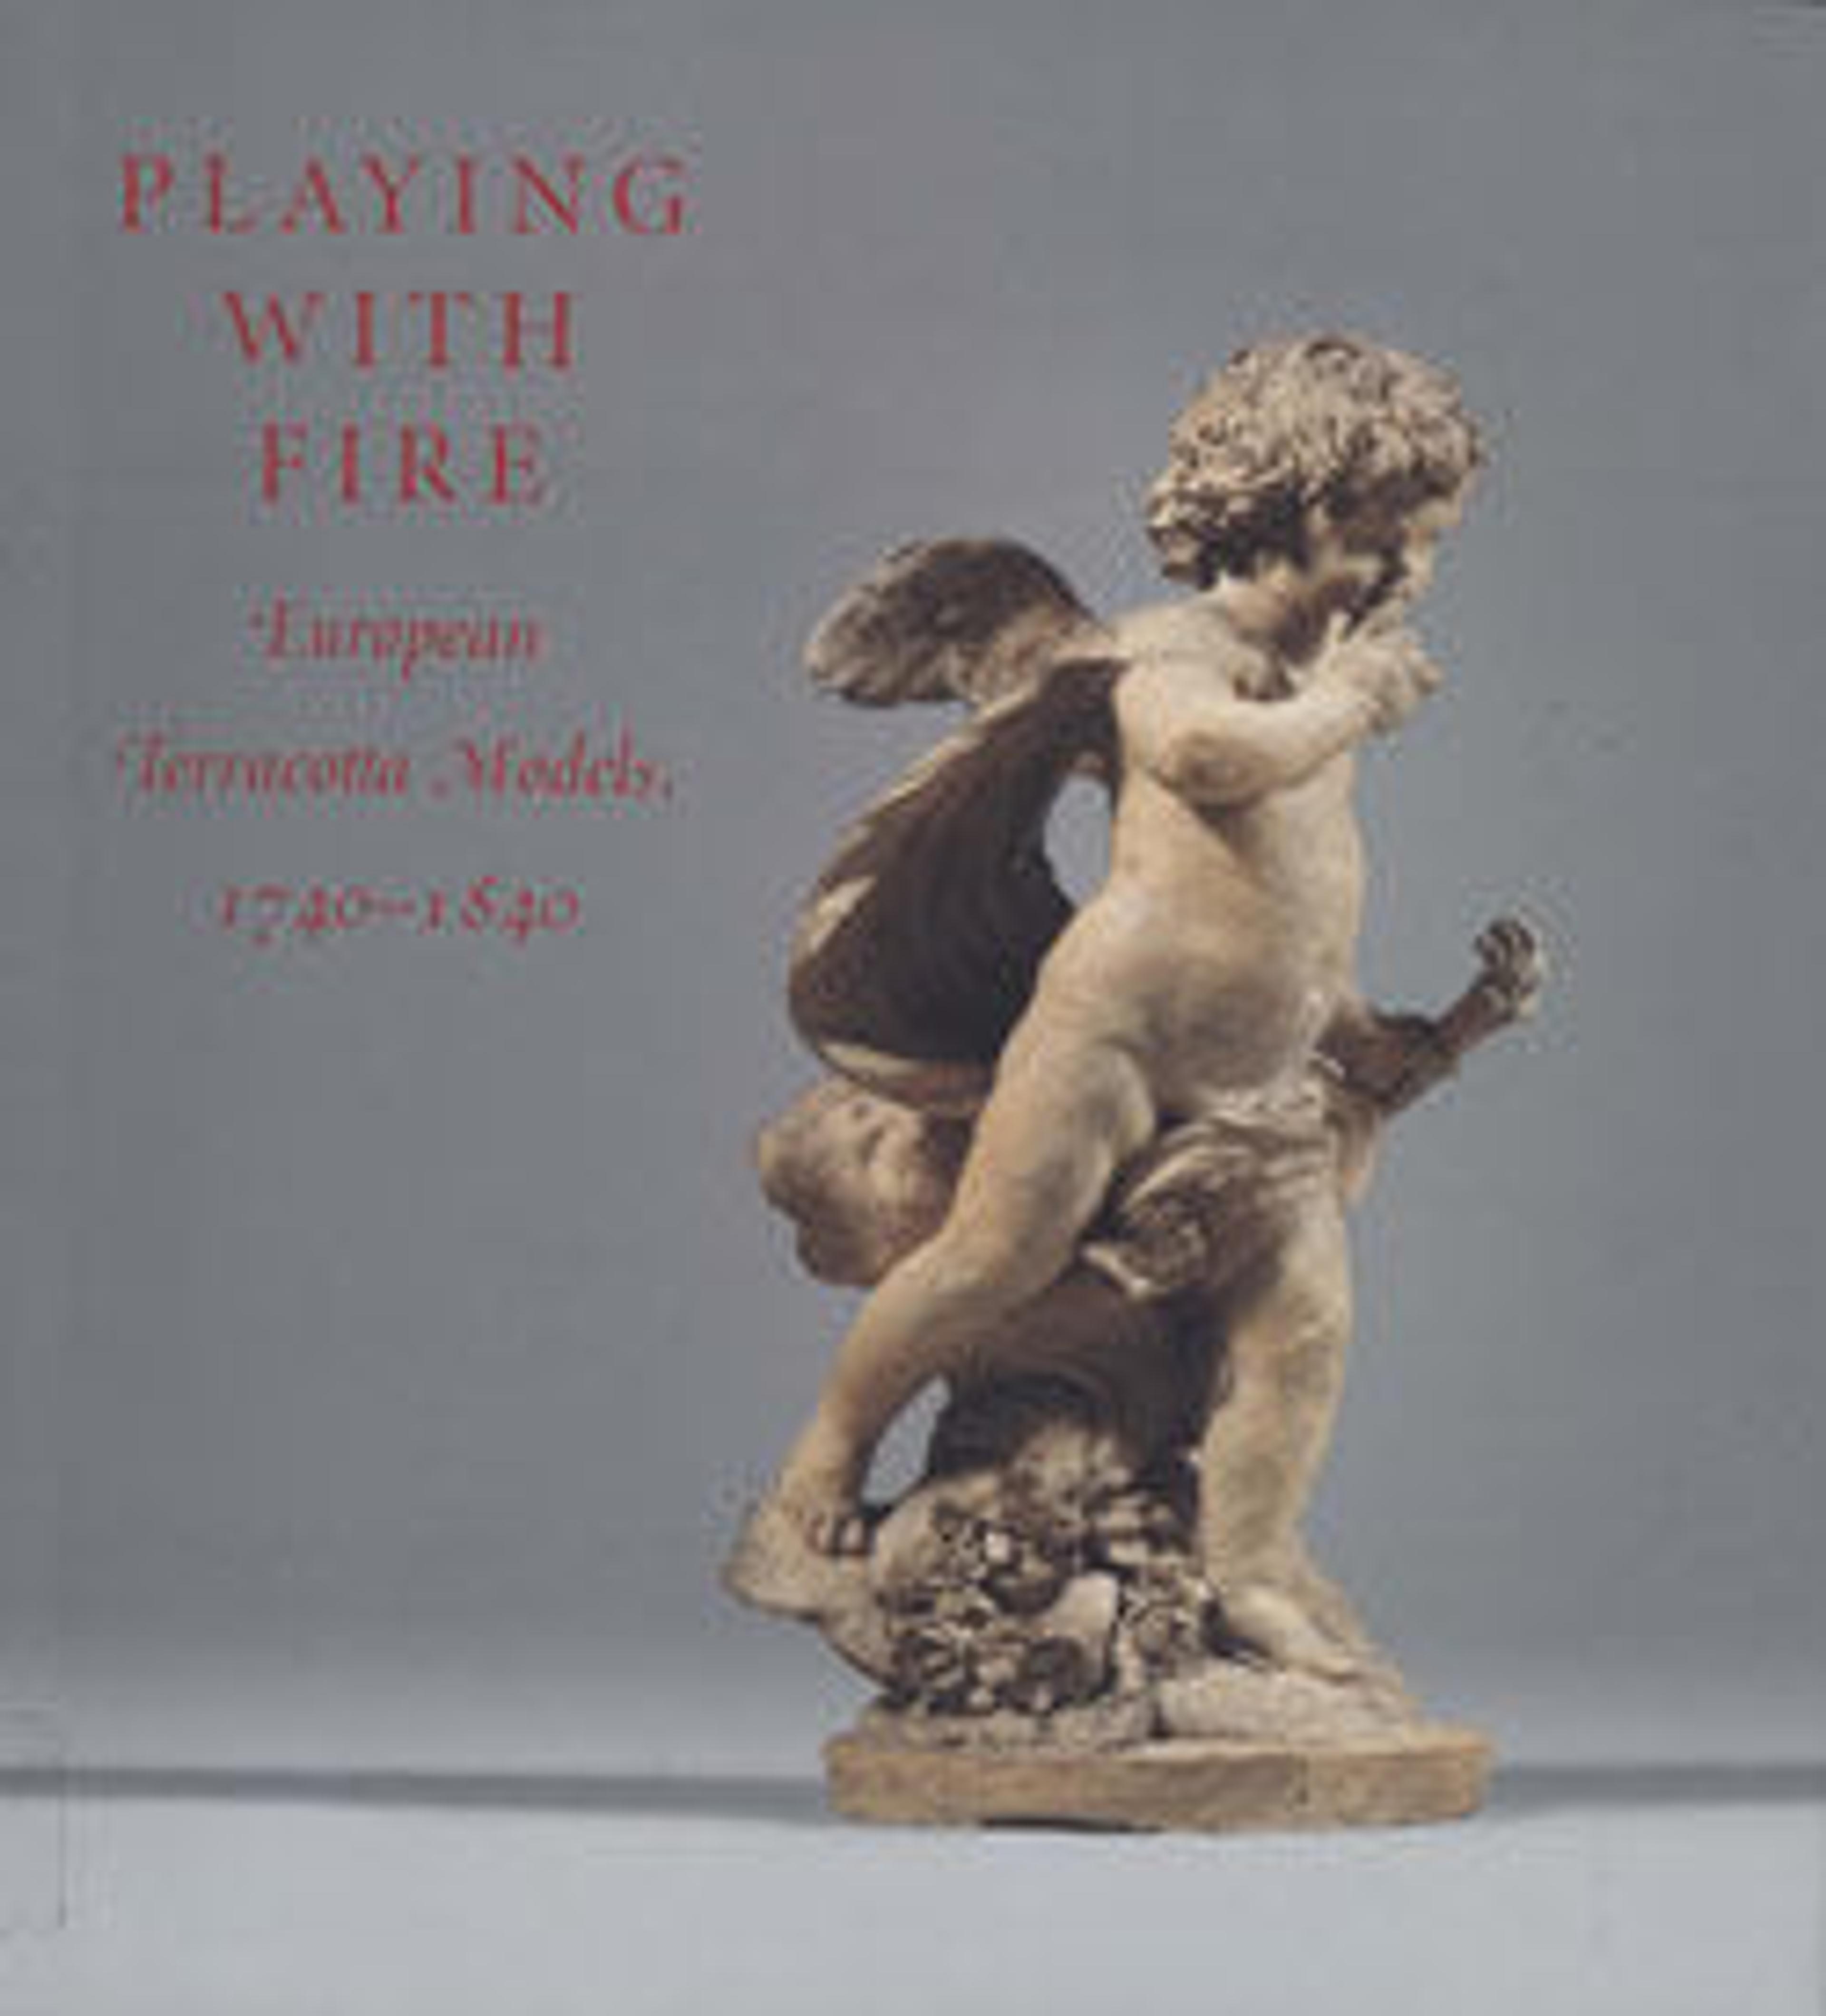 Playing with Fire: European Terracotta Models, 1740-1840